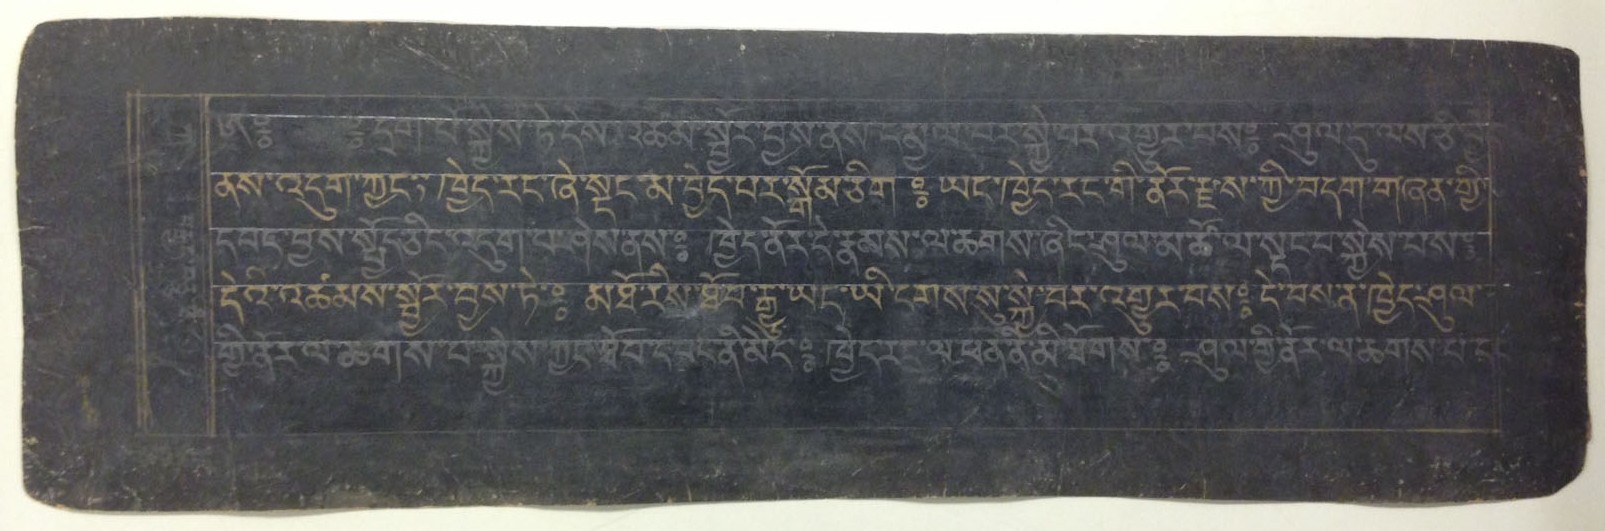 A page from an 18th-century manuscript copy of the Tibetan Book of the Dead. The text is written in alternating gold and silver ink. The blue-black lacquered paper was created by applying a lacquer made of yak-skin glue, animal brains, and soot, which was then burnished to create an appropriate writing surface.   (MSS 14259)